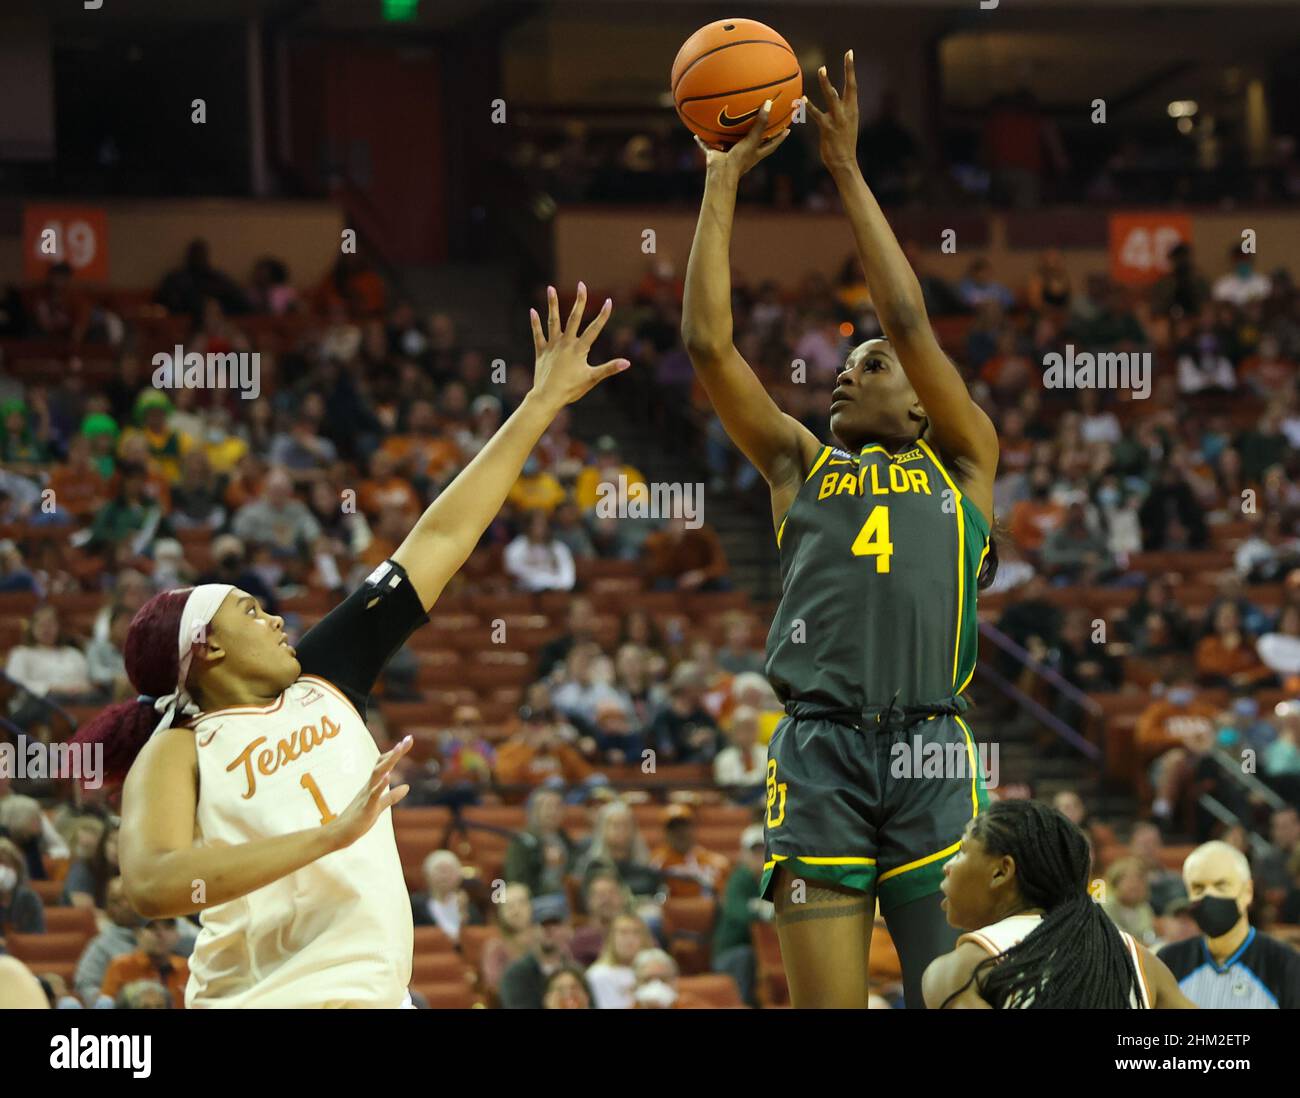 February 6, 2022: Baylor Lady Bears center Queen Egbo (4) shoots a jump shot during an NCAA women's basketball game on February 6, 2022 in Austin, Texas. (Credit Image: © Scott Coleman/ZUMA Press Wire) Stock Photo